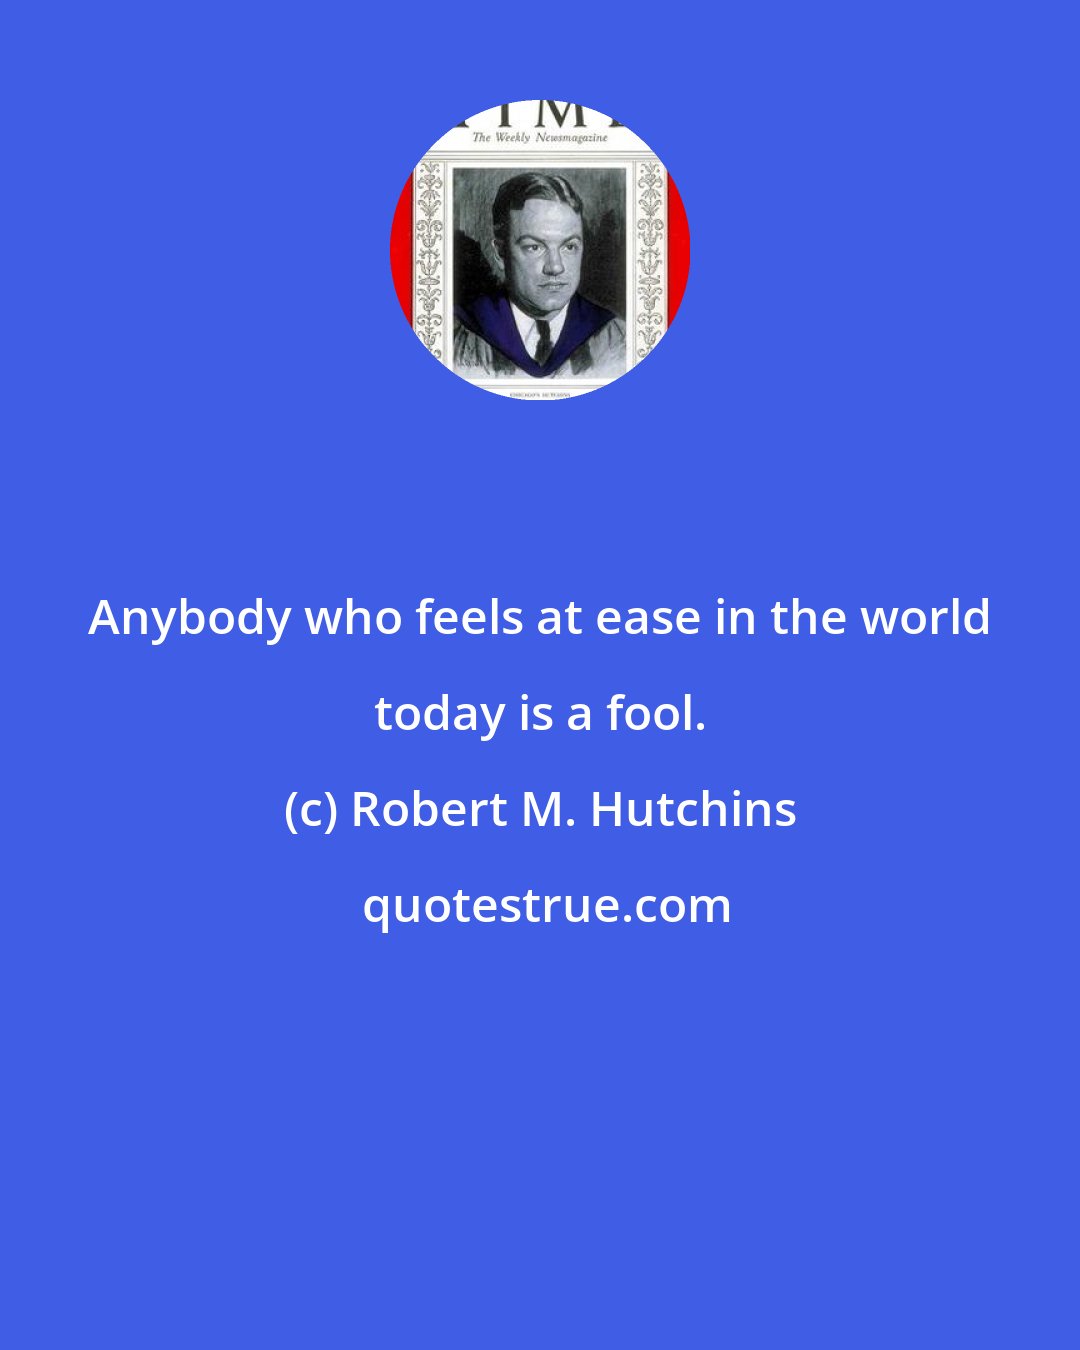 Robert M. Hutchins: Anybody who feels at ease in the world today is a fool.